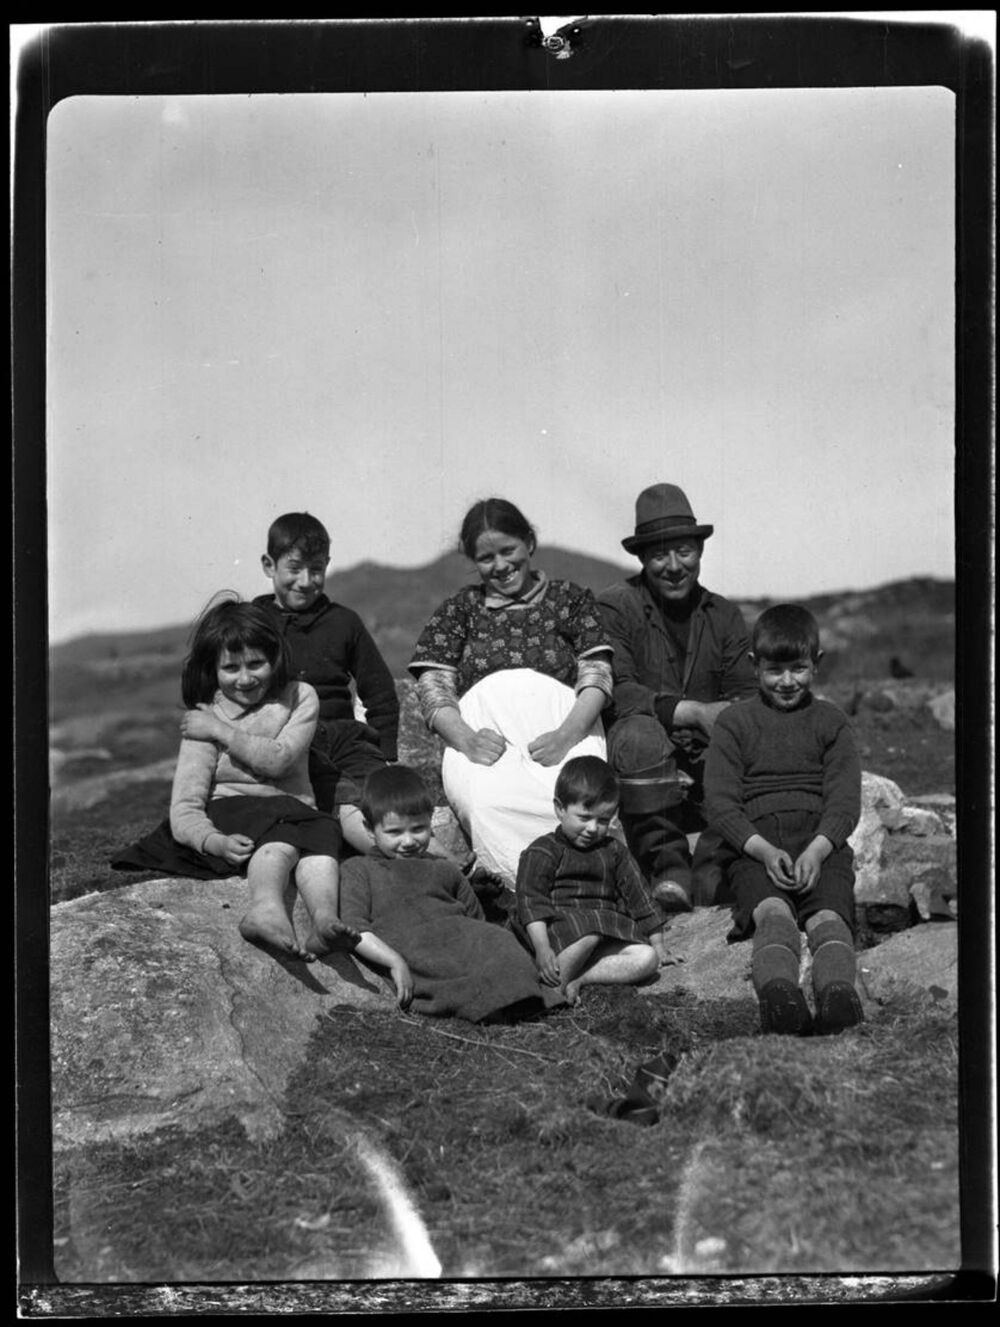 A black and white photo of a family seated on a hillside. Peigi Nill is at the centre, surrounded by children.